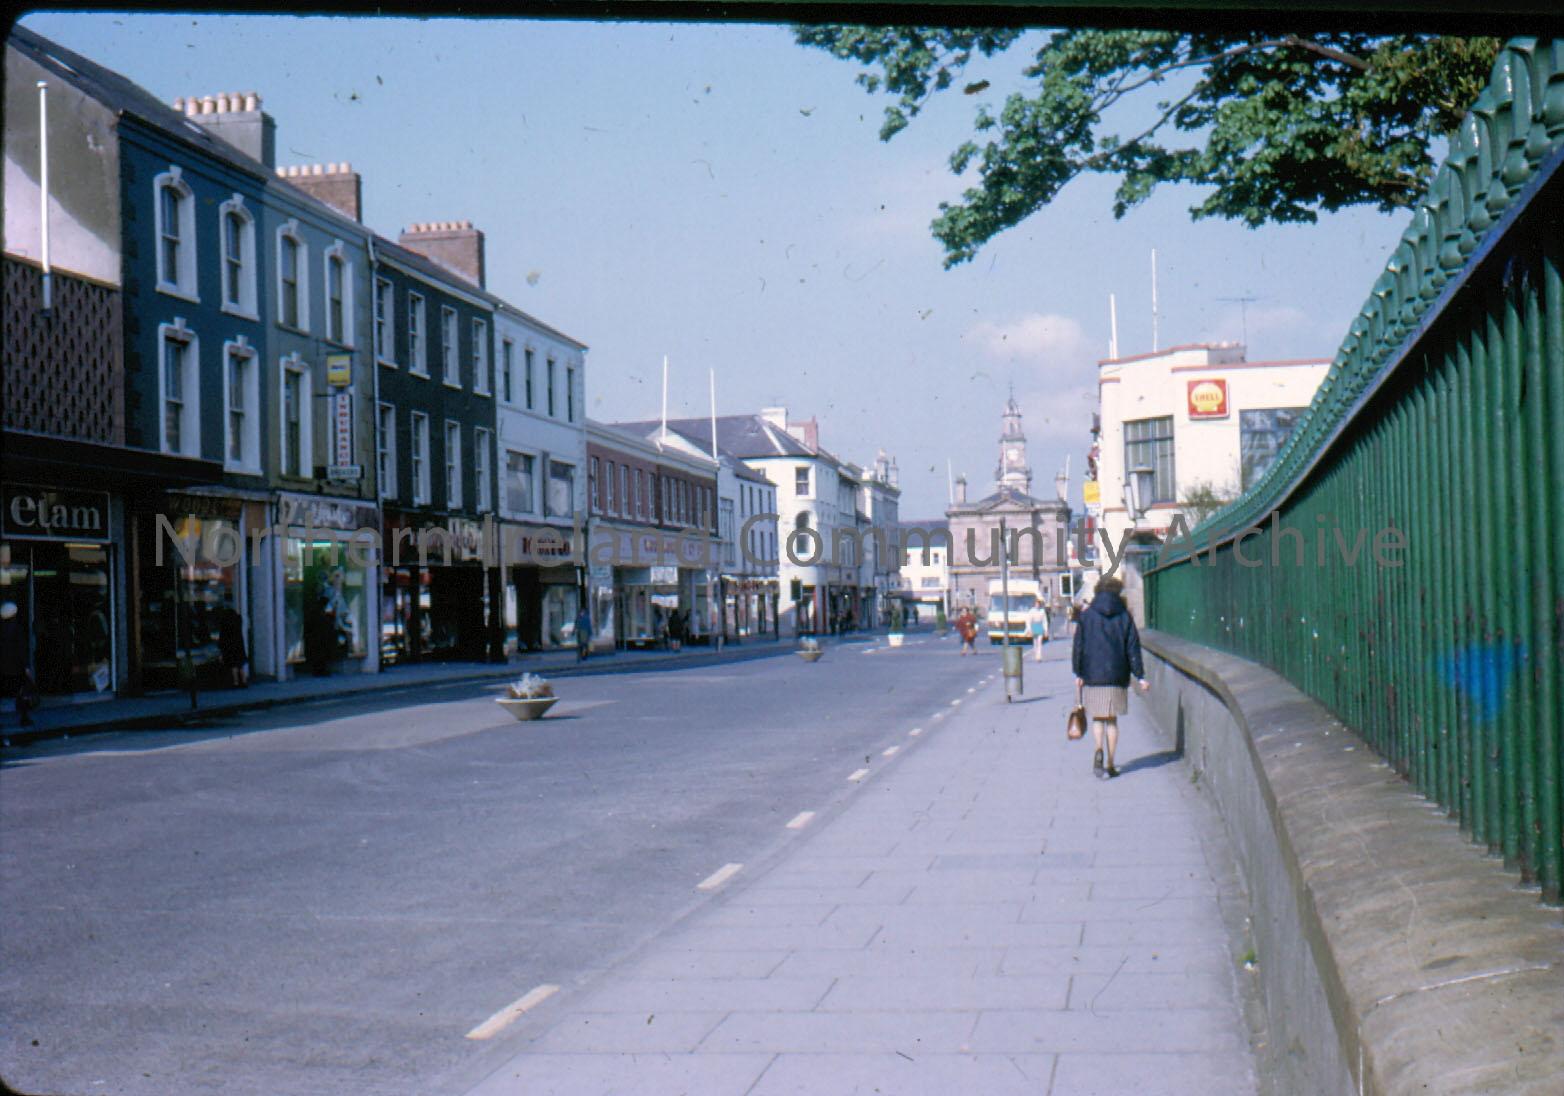 Church Street after it was closed to traffic